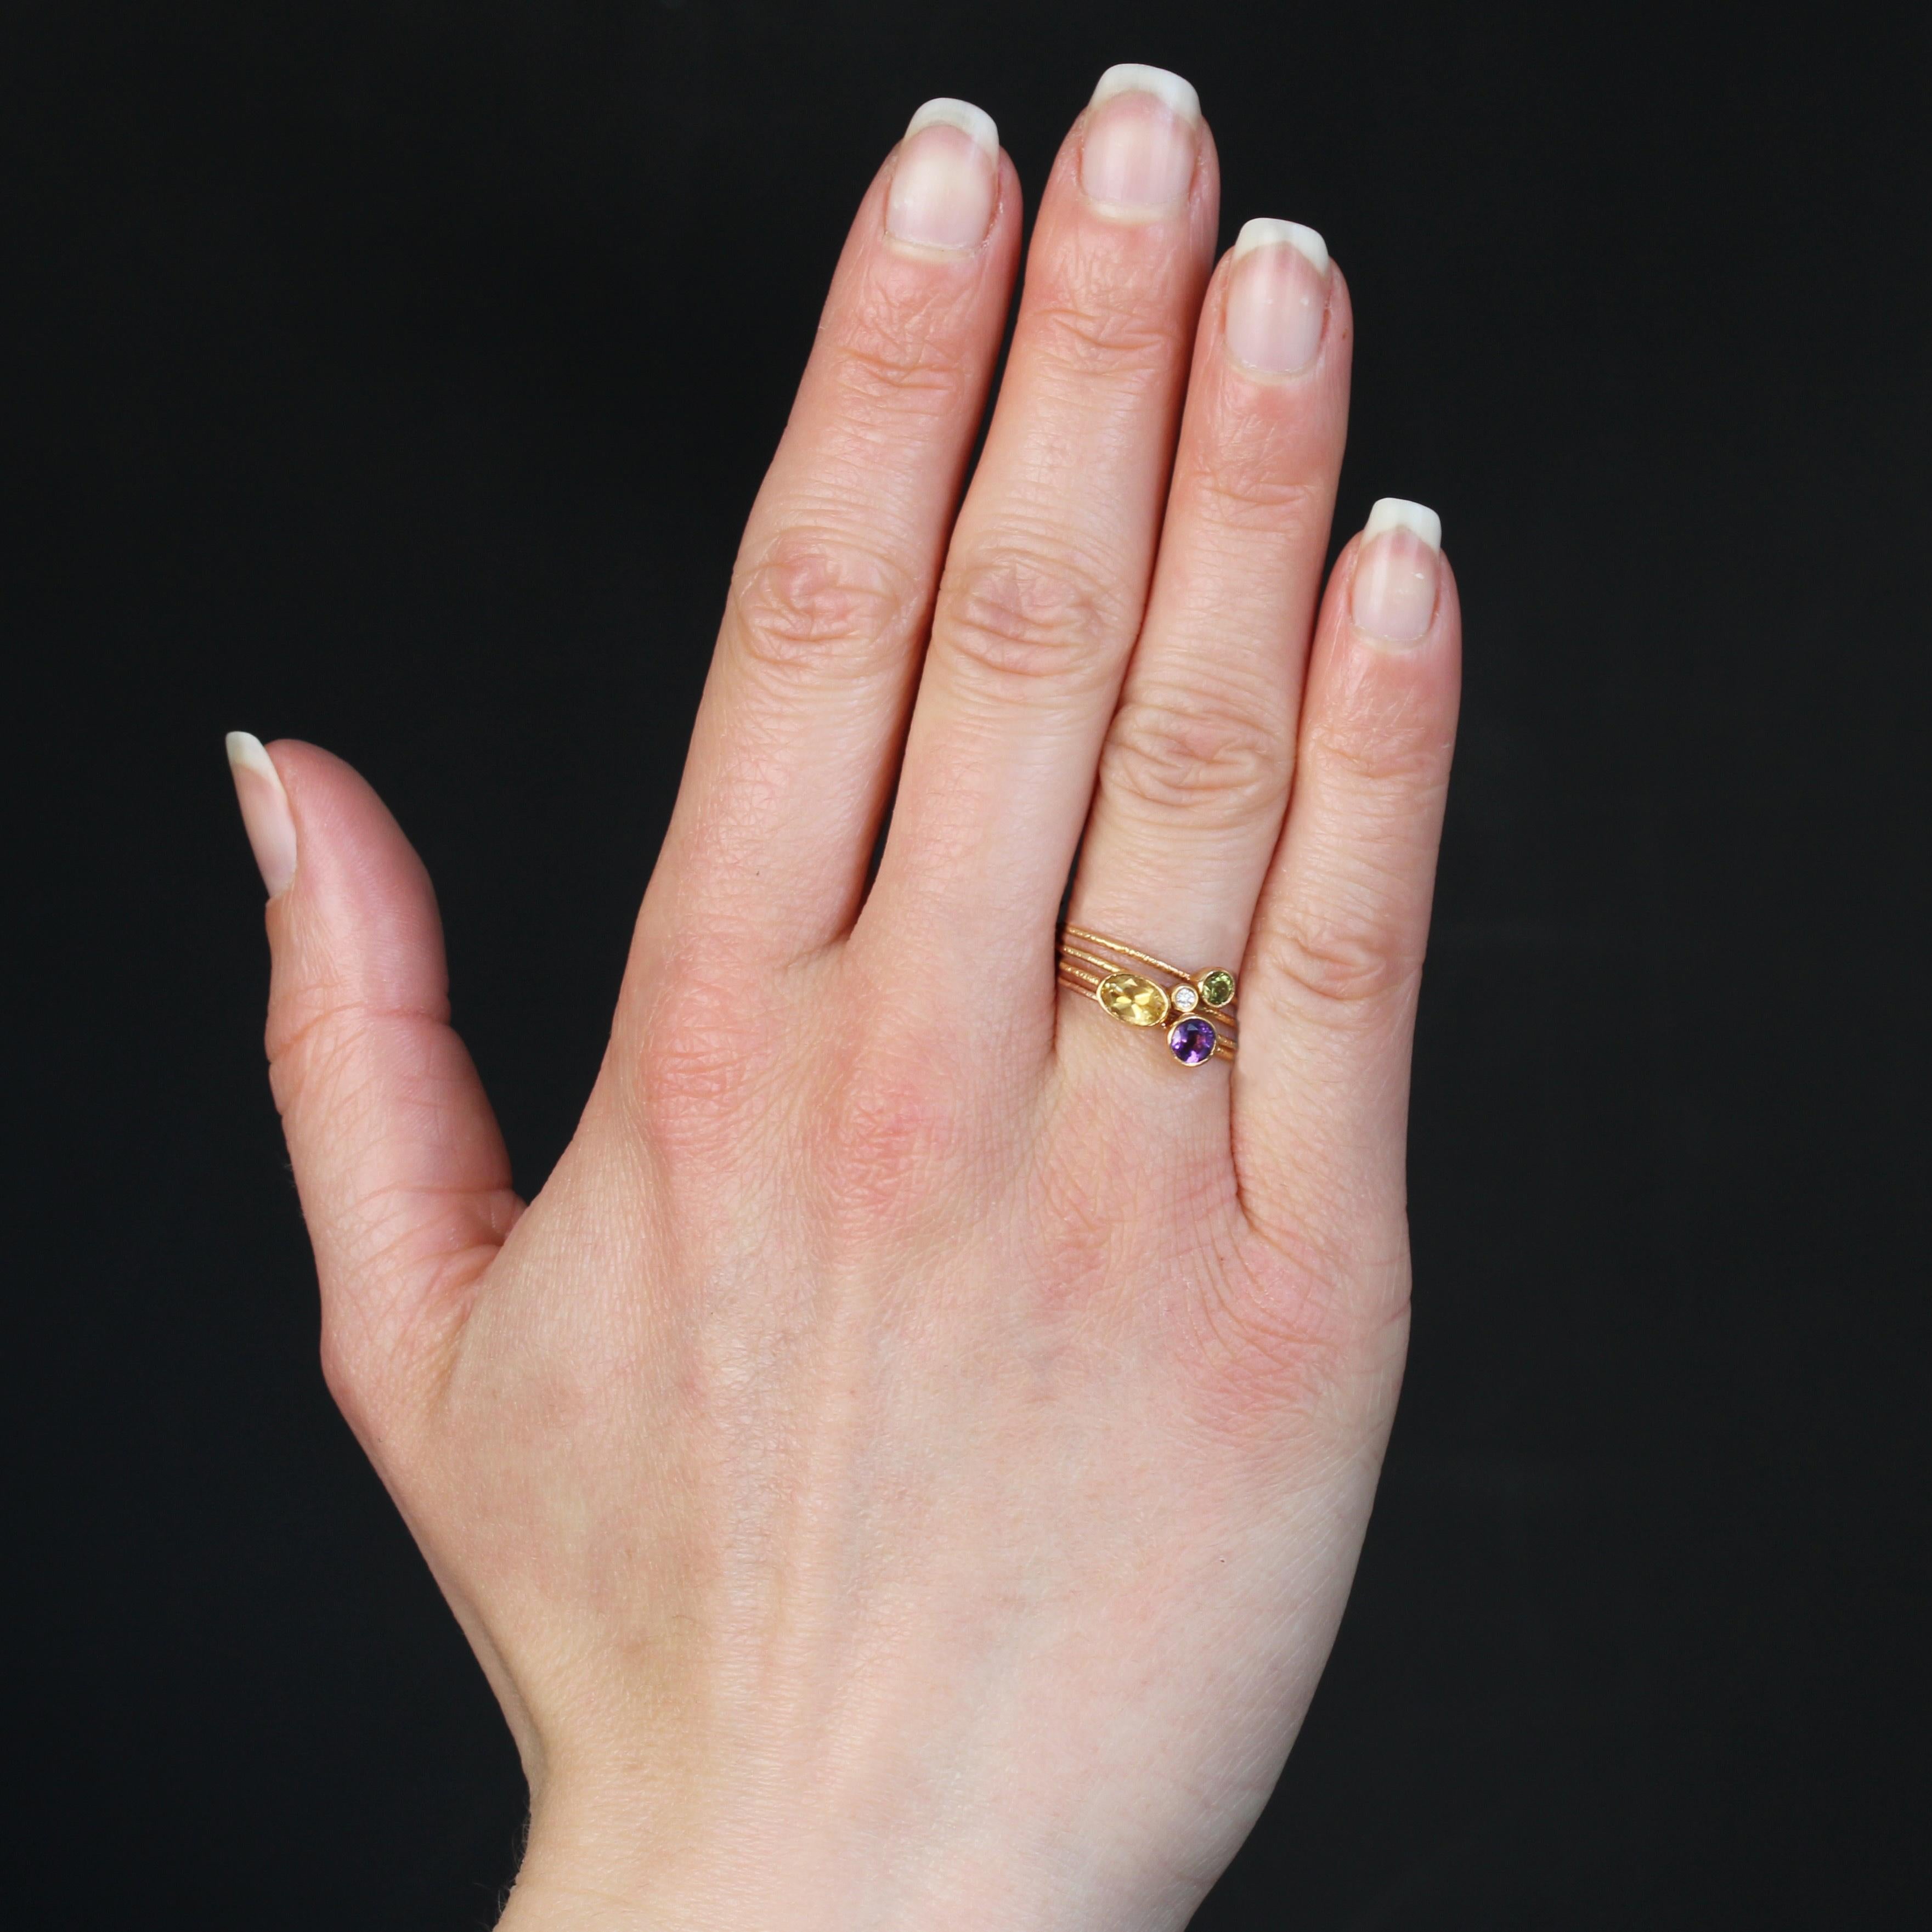 Ring in 14 karat rose gold.
Second-hand Gold ring, it is composed of 4 rings of gold amati retained between them not a mobile gold bar. Each ring is set closed round or oval of an amethyst, a citrine, a diamond and a peridot.
Height of the gold bar